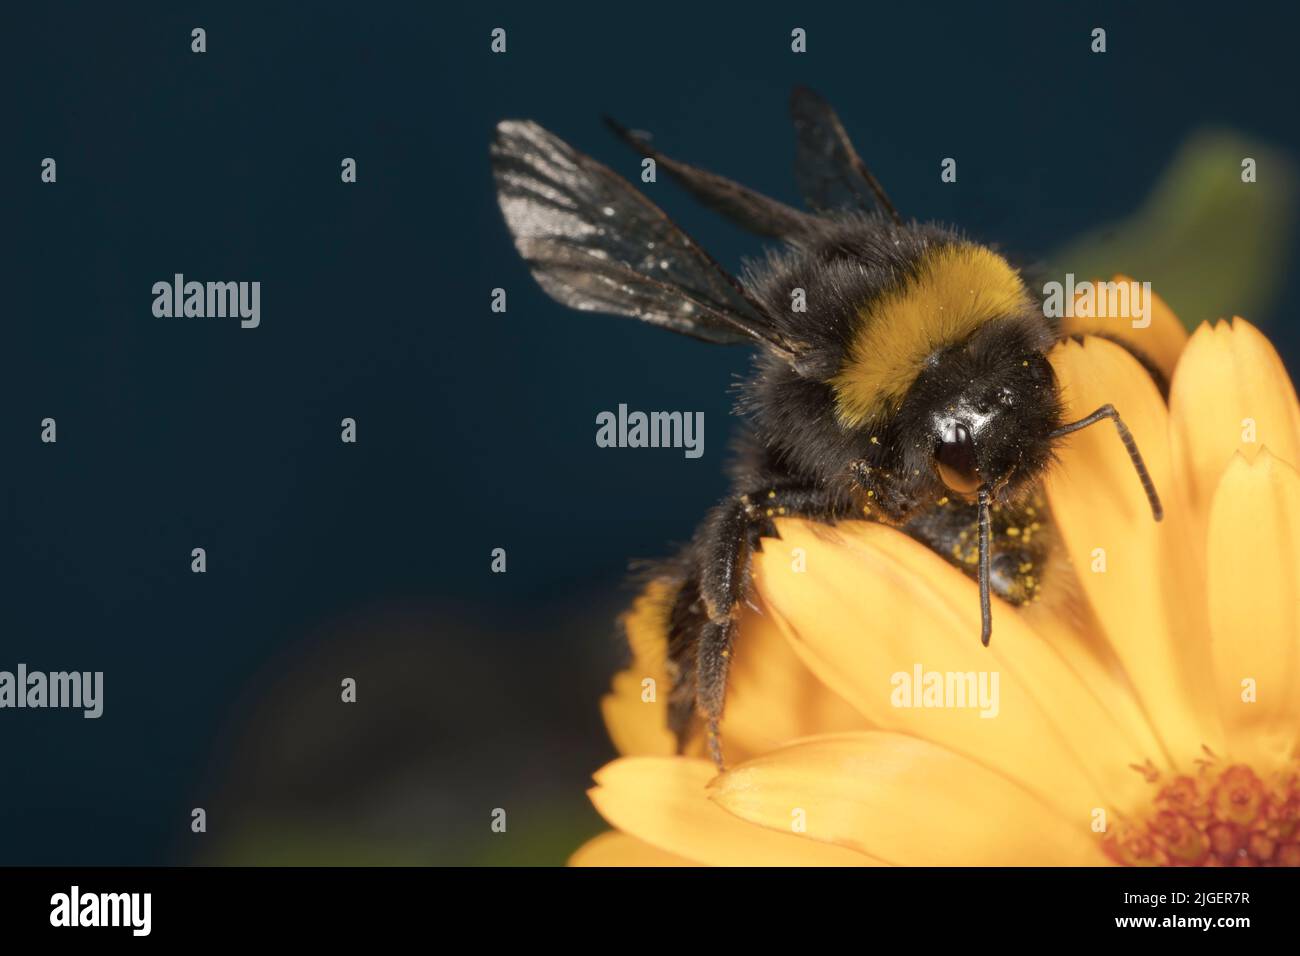 Bumblebee on a flower meadow Stock Photo